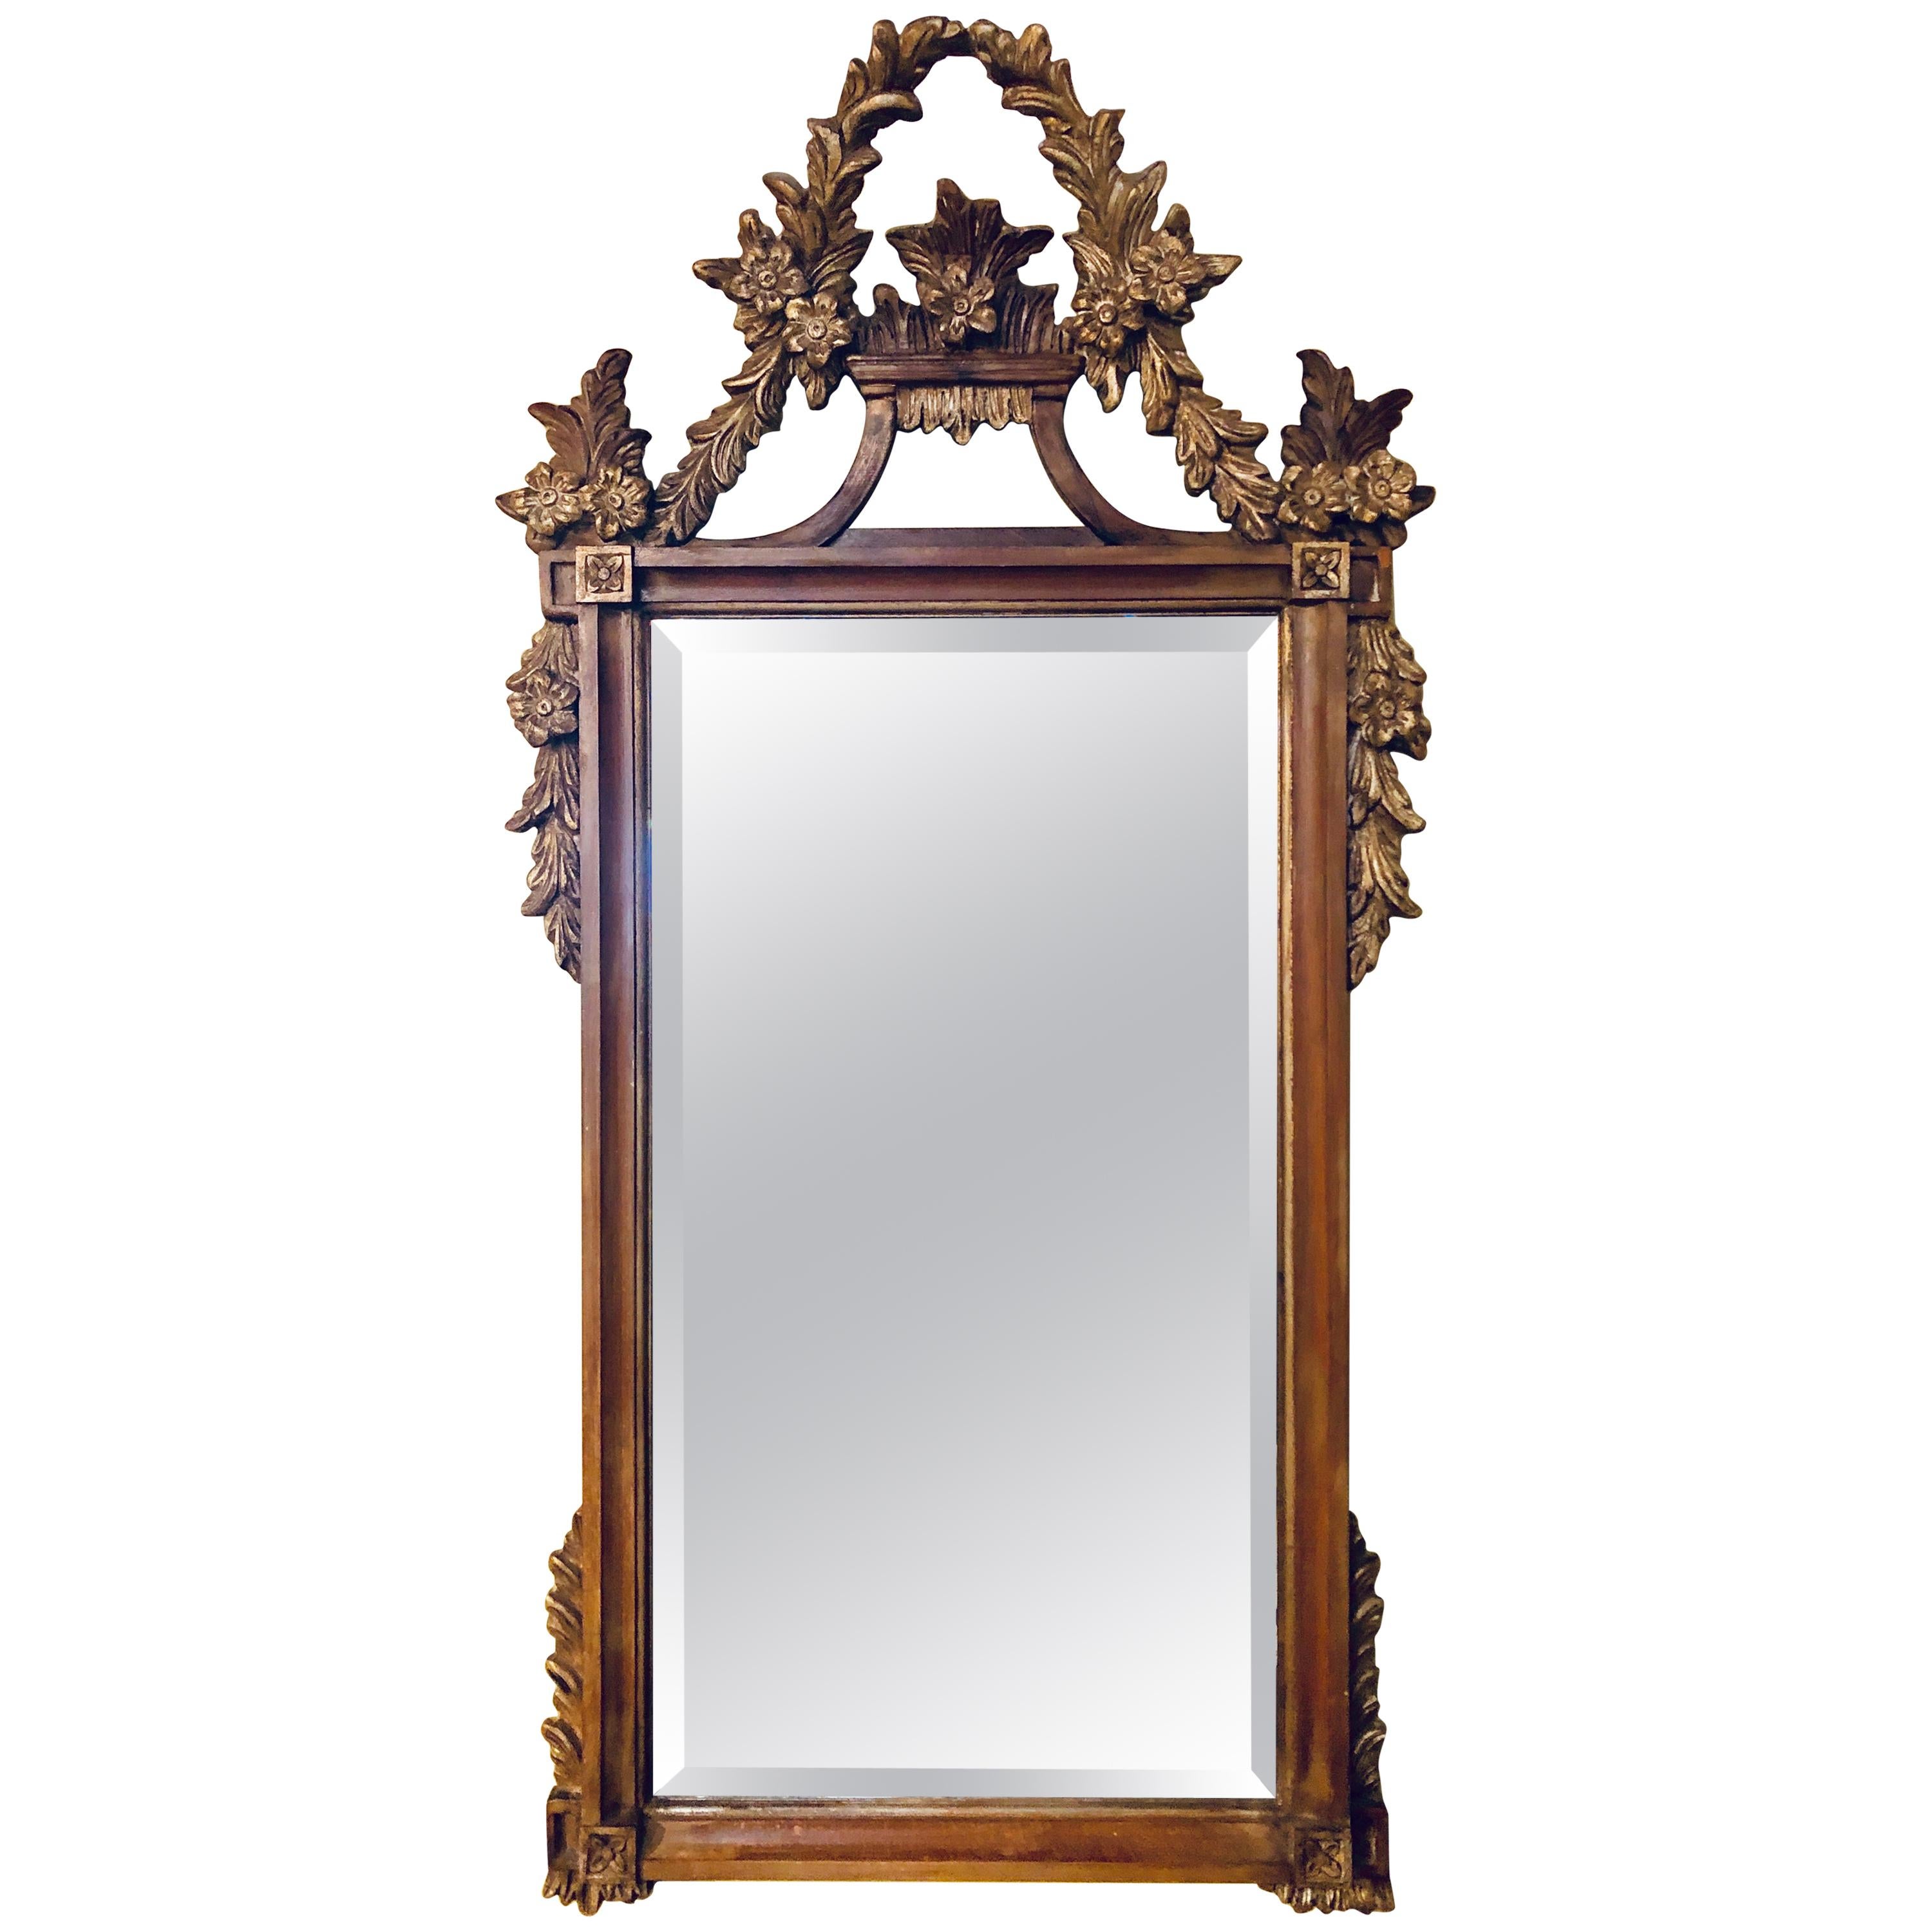 A Gilt Gold Italian Acanthus Leaf Carved Wall or Console Mirror